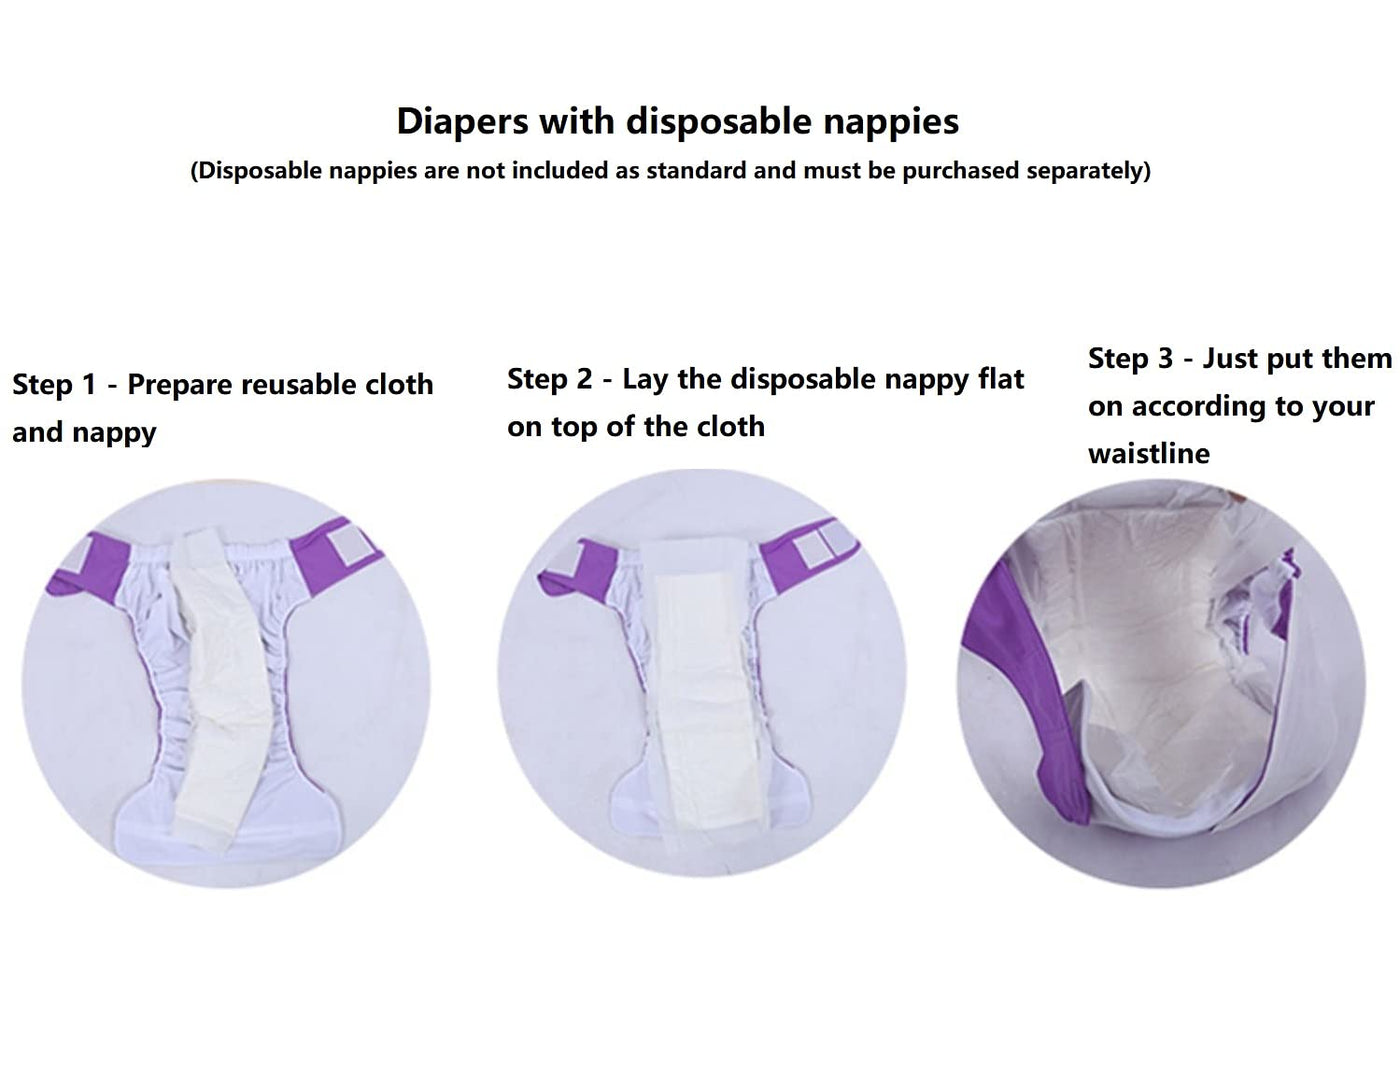 Reusable Adults Diapers - Adults Nappy Washable Incontinence Man Protective  Underwear Breathable Leakfree for Women Men Incontinence